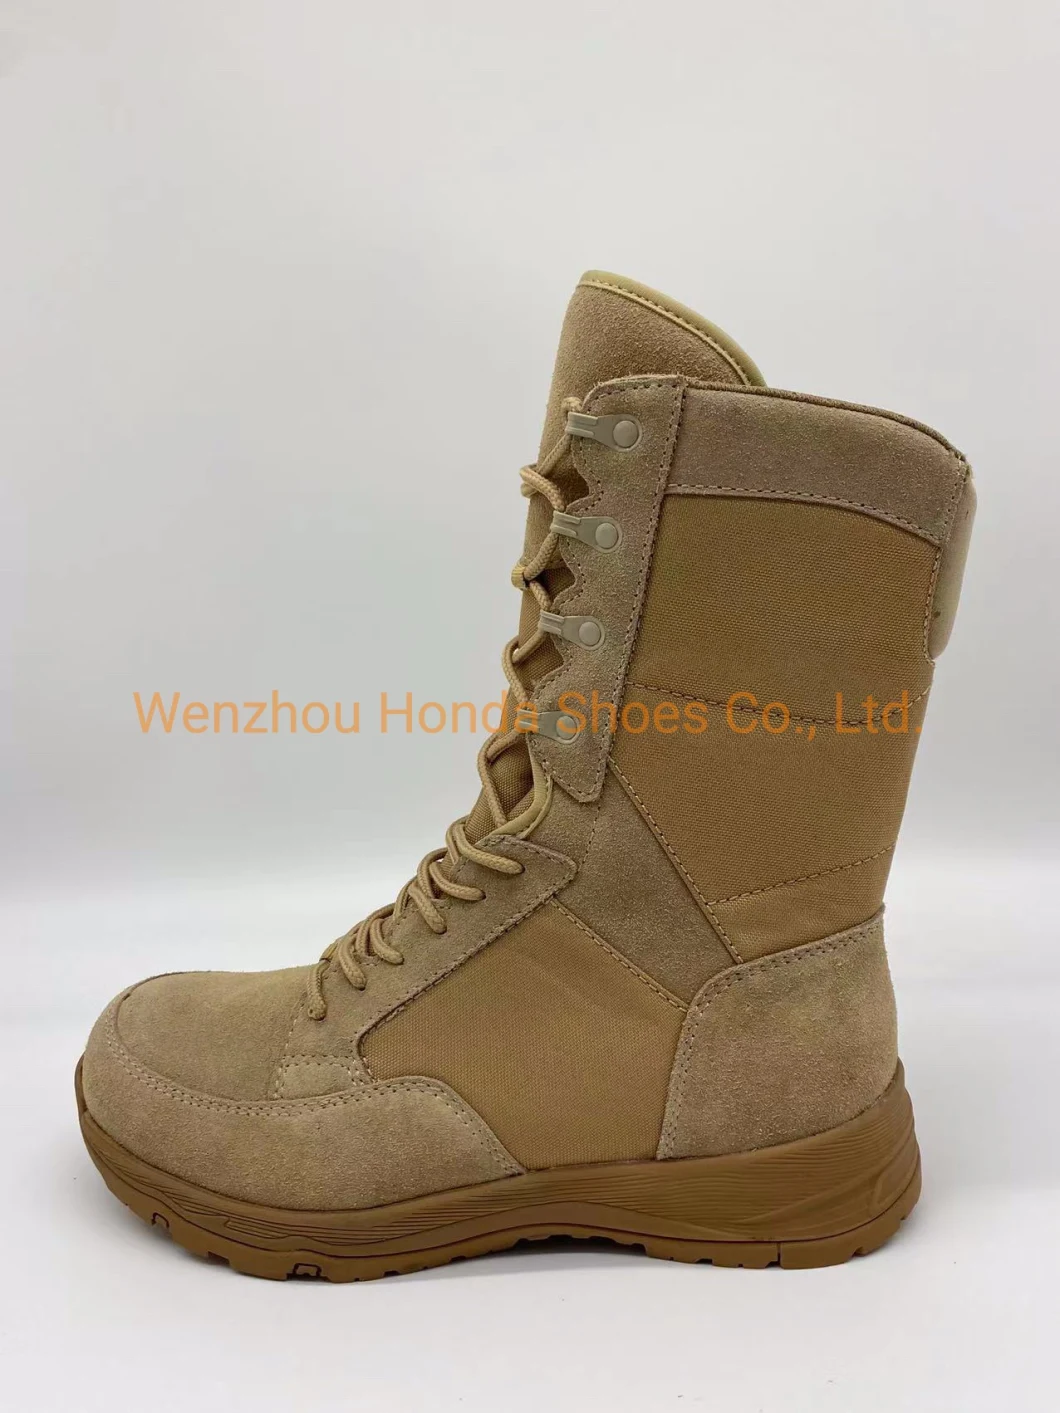 Factory Direct Safety Combat Desert Color High Military/Army/Police Style Tactical Boots